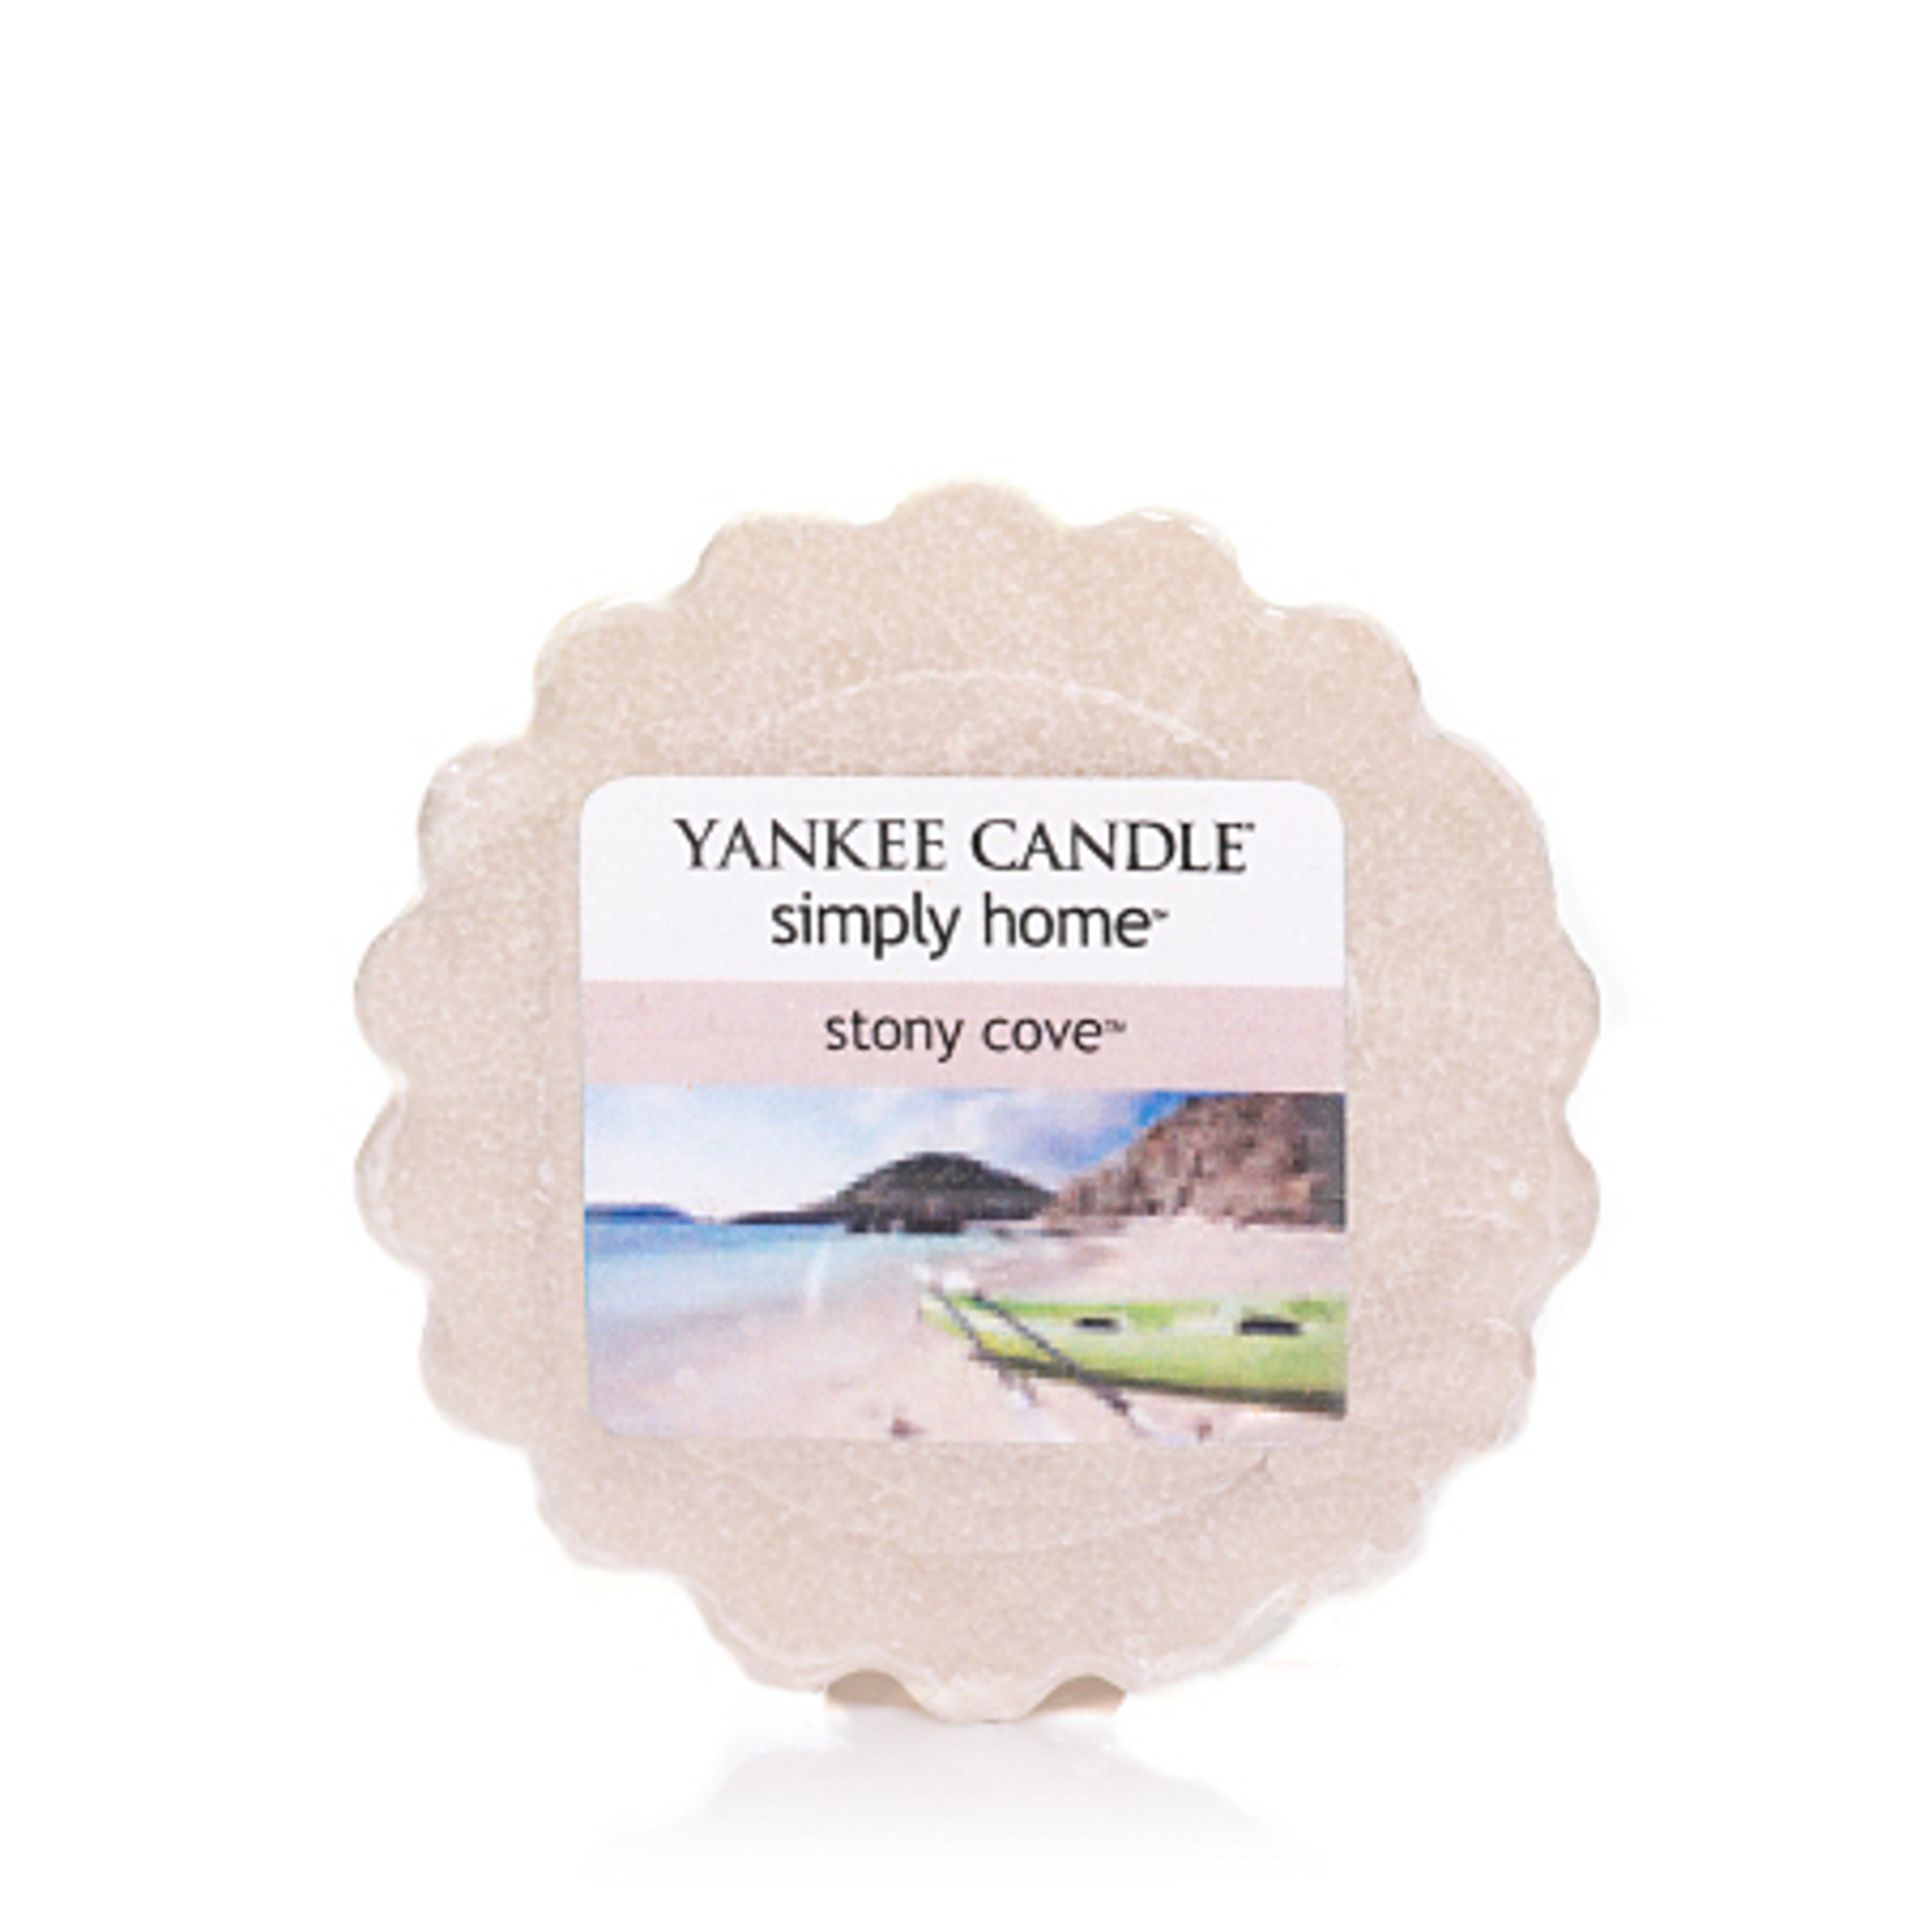 V Brand New 24 x Yankee Candle Tarts Stony Cove RRP: £35.76 (Yankee Candles) X 2 YOUR BID PRICE TO - Image 2 of 2